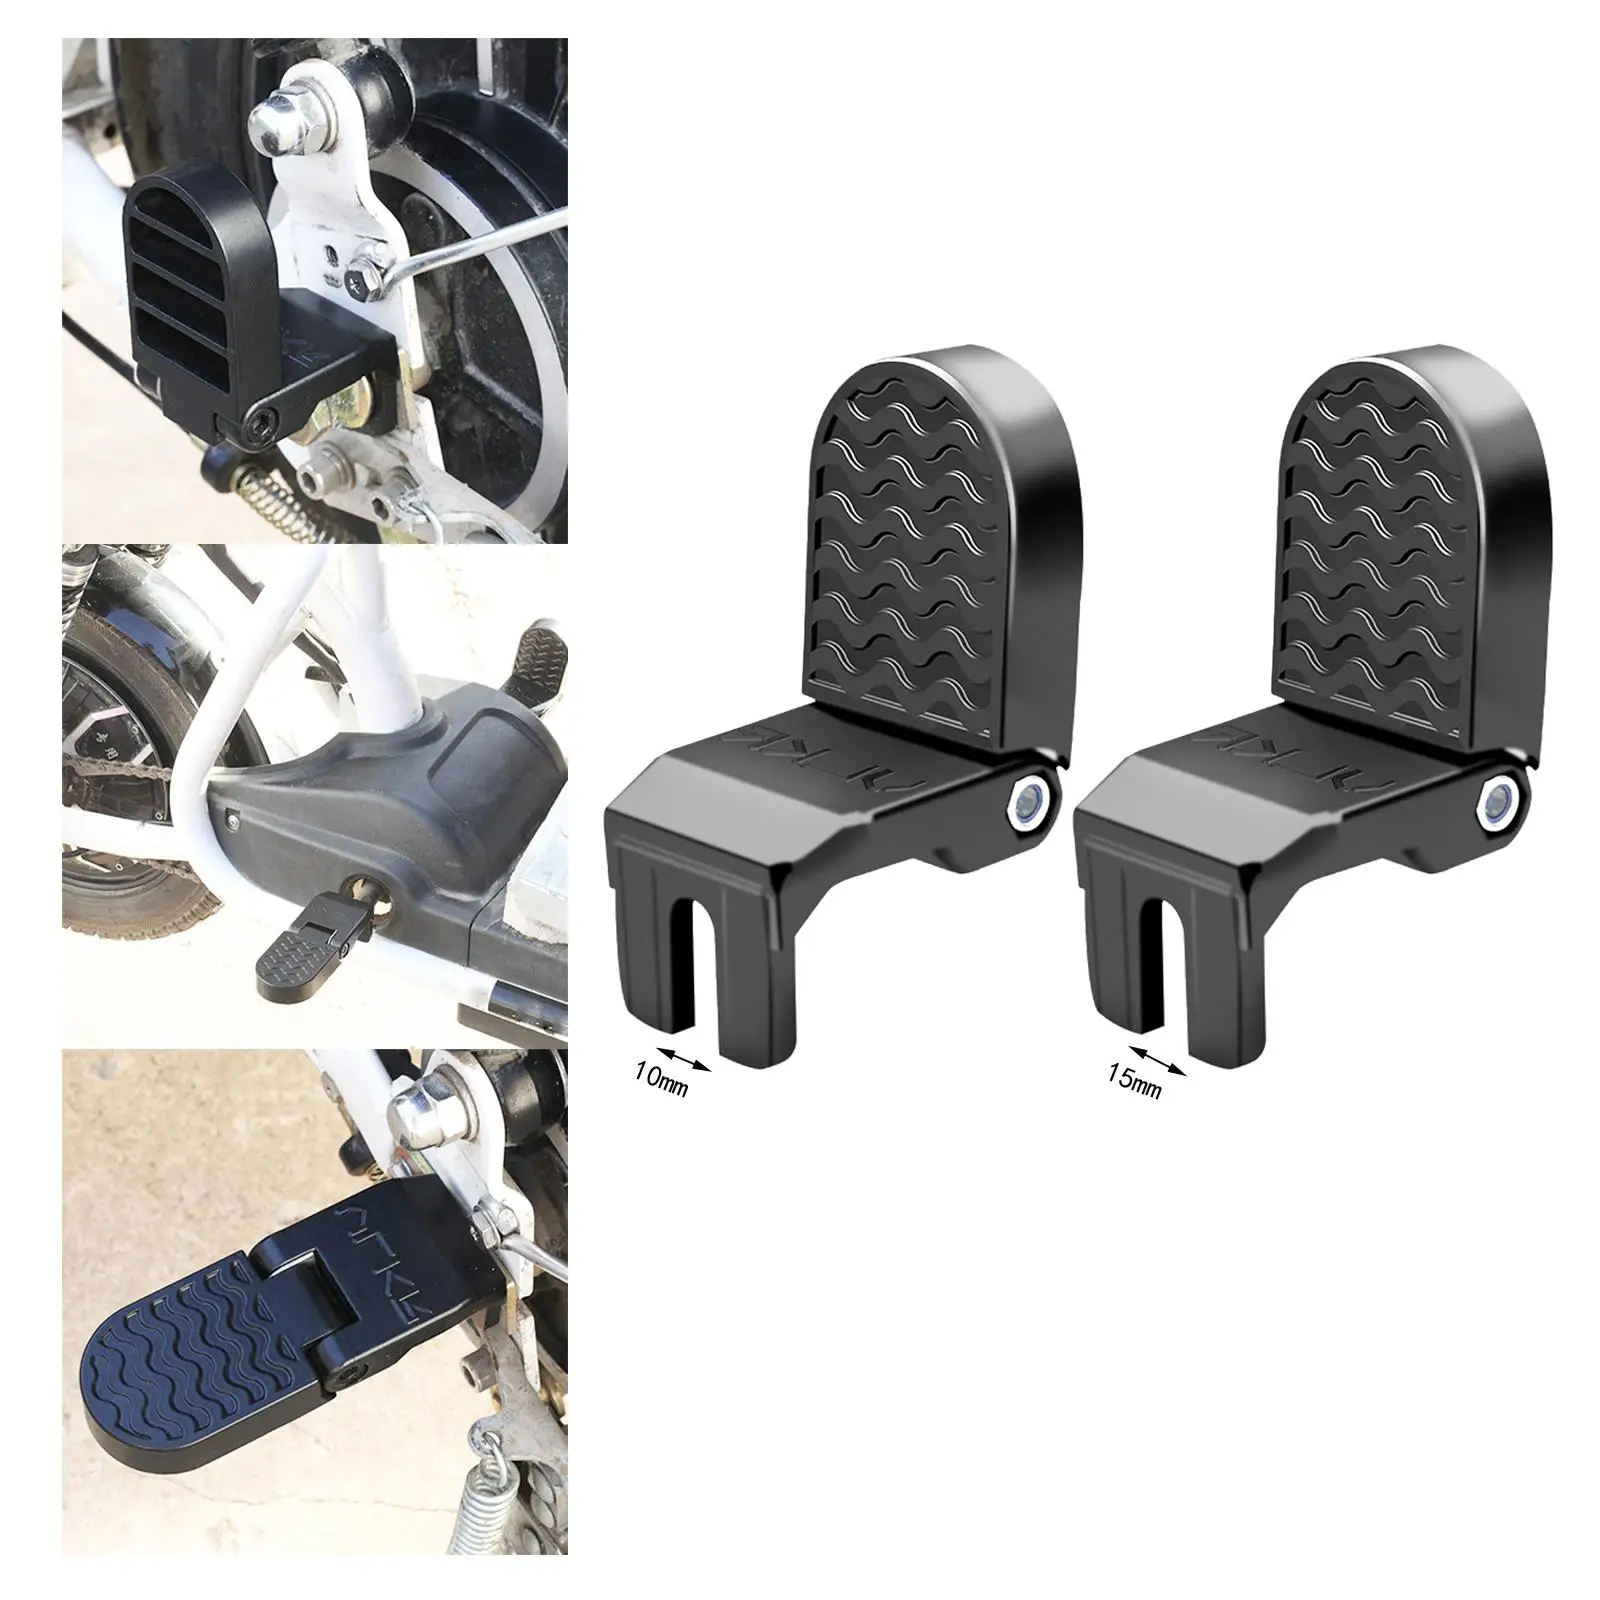 2x Motorbike Bike Rear Pedals Footpeg Cycling Accessories Bicycle Footrest